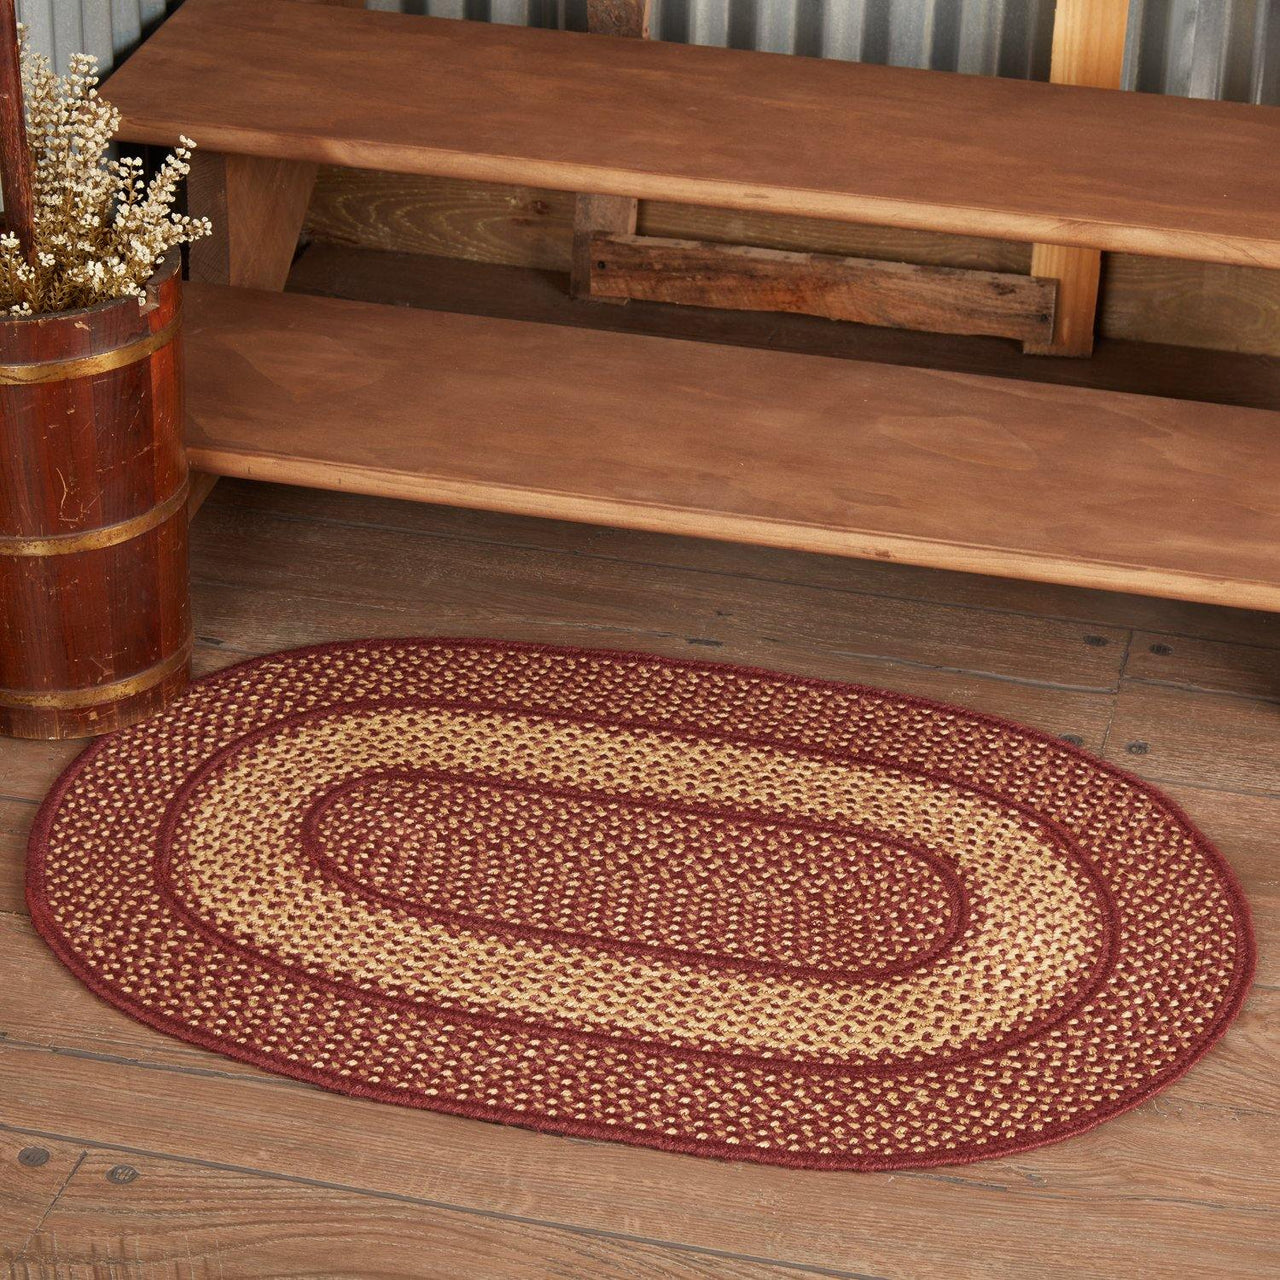 Burgundy Red Primitive Jute Braided Rug Oval 24"x36" with Rug Pad VHC Brands - The Fox Decor